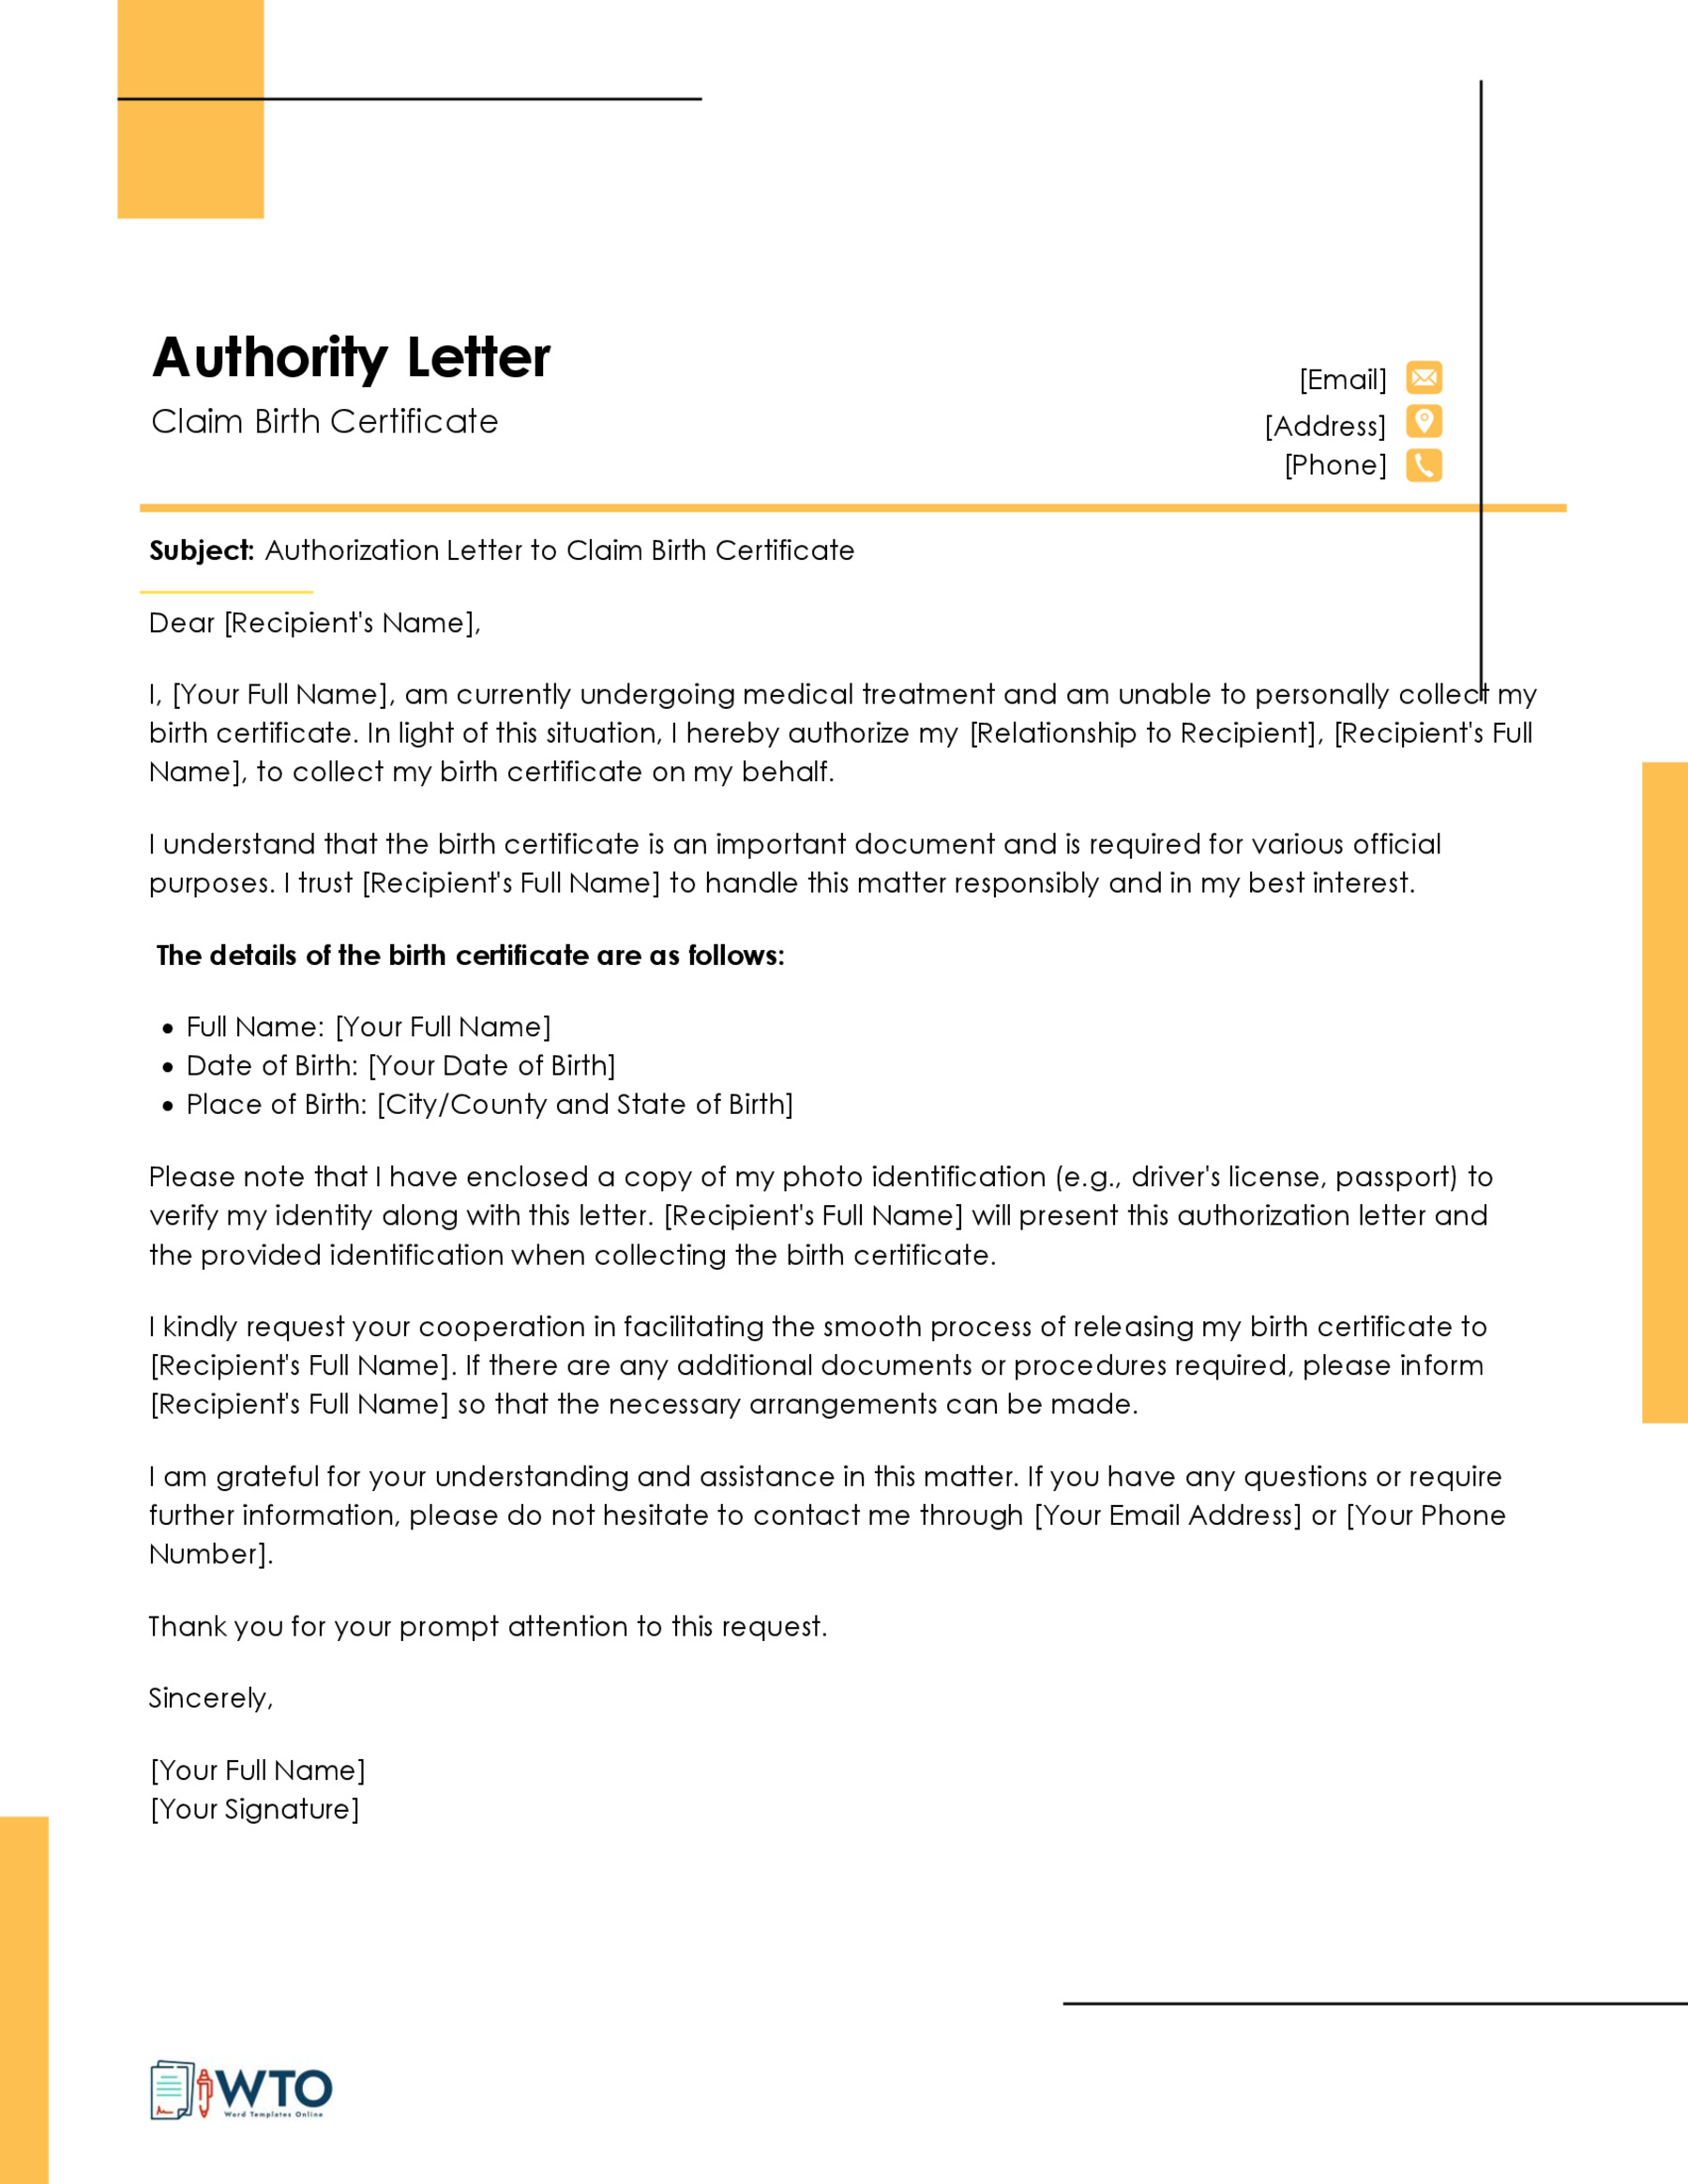 Authorization Letter for Claiming Birth Certificate Template-Ms word Format